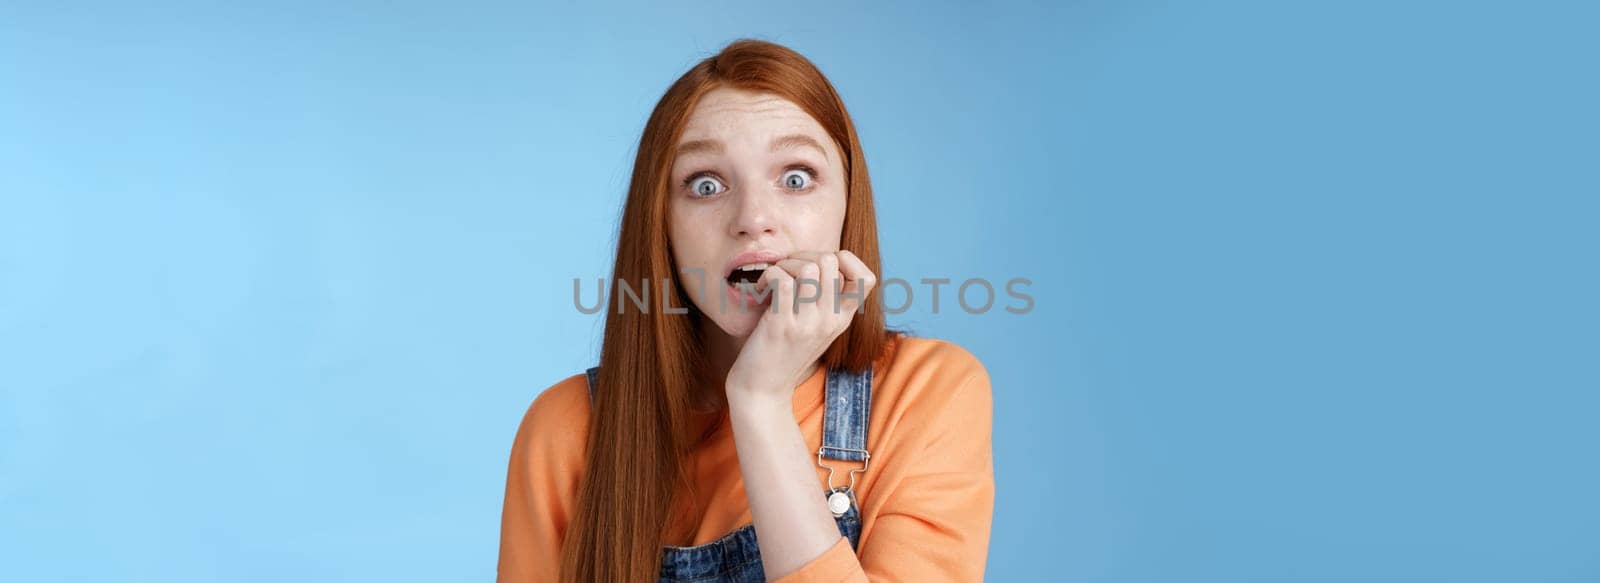 Scared unconfident anxious young trembling redhead girl wide eyes staring intense emotional biting fingernails, fan worry favorite character tv series dies standing nervously blue background.